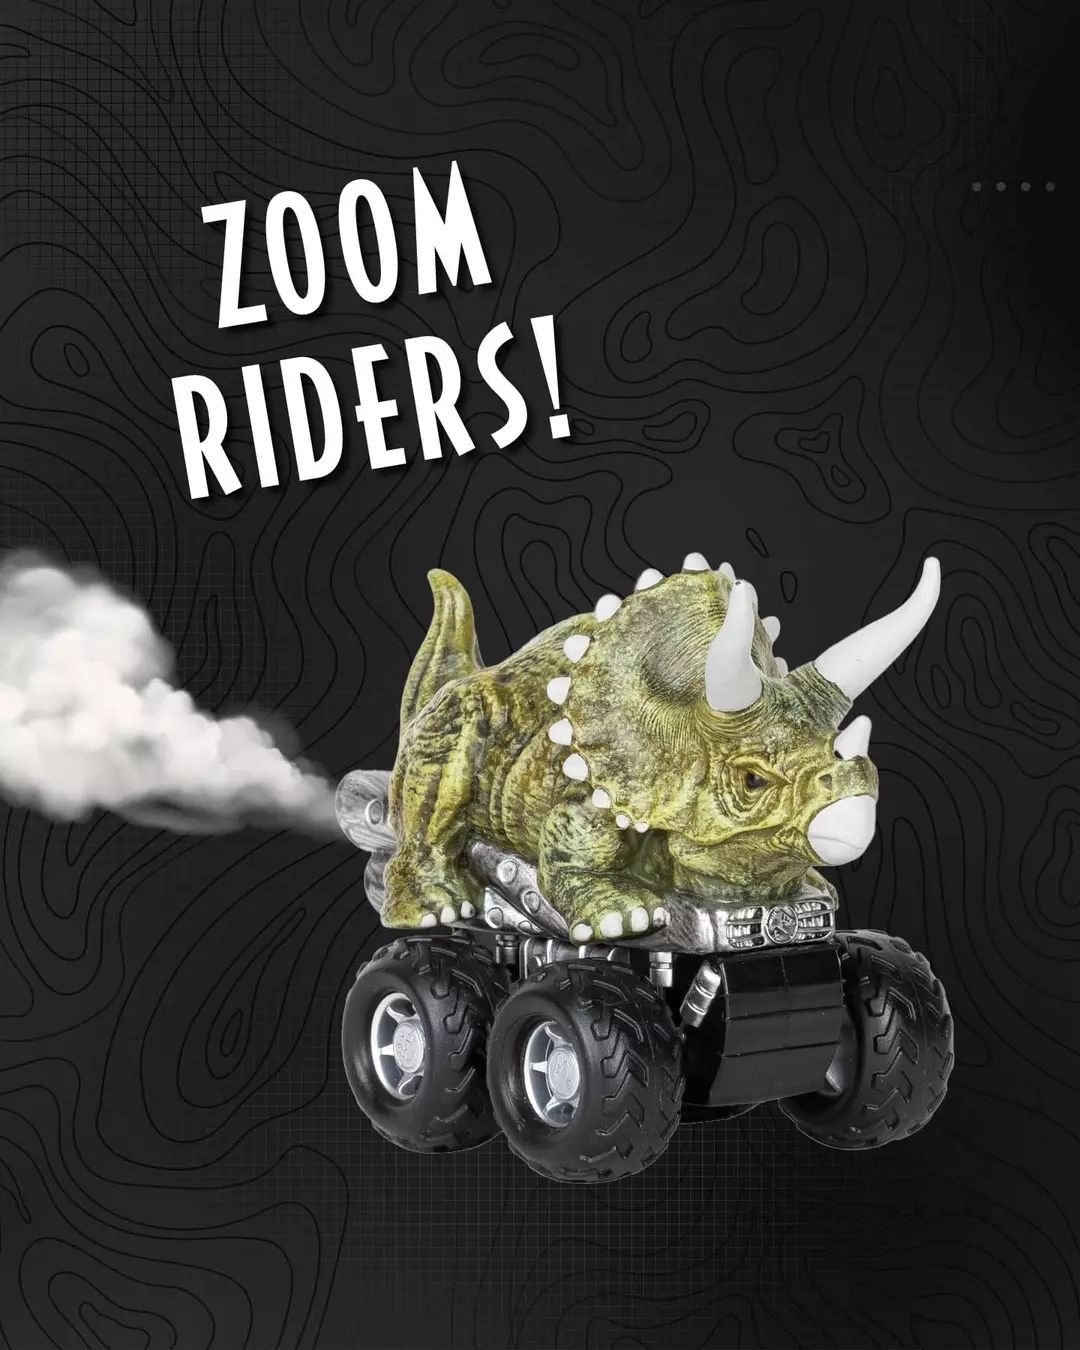 ZOOM into battle with your Zoom Rider of choice&nbsp;🏃💨 &nbsp;

Grab your favourite Zoom Rider and get ready to enjoy endless hours of racing, role playing and battling with friends! With pull back power and all-terrain wheels, these dinos are roar